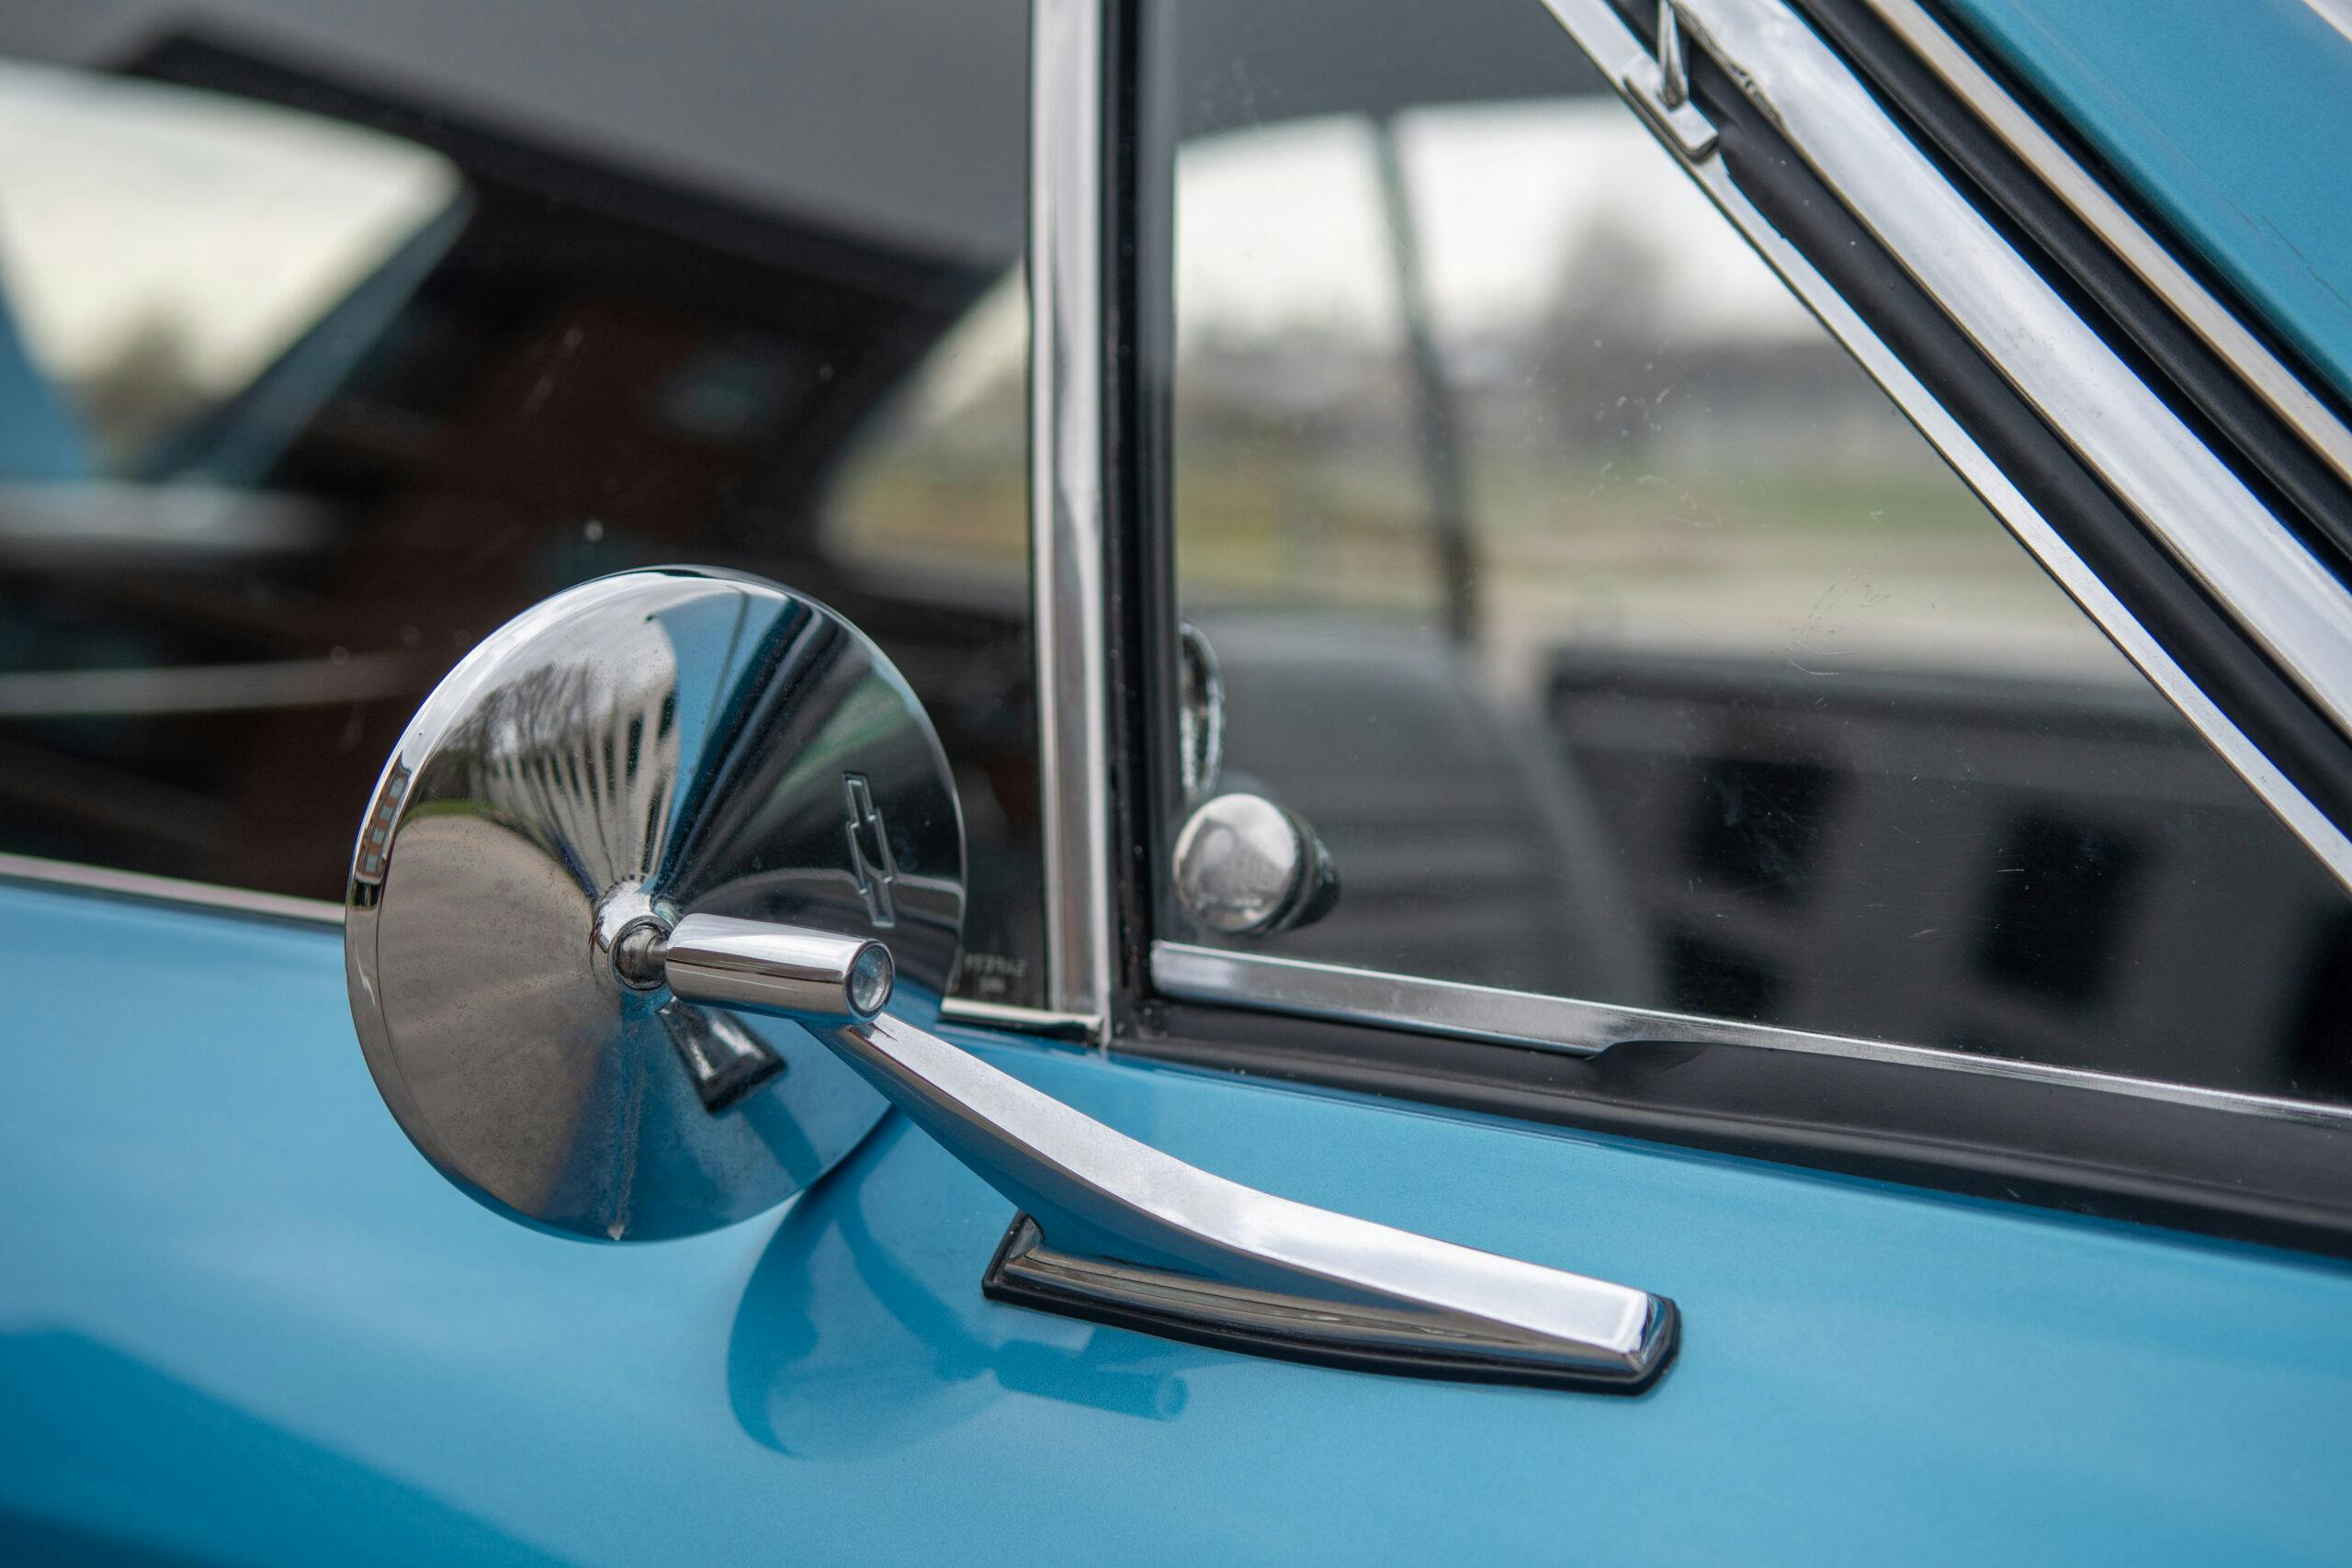 Chevelle SS side mirror detail